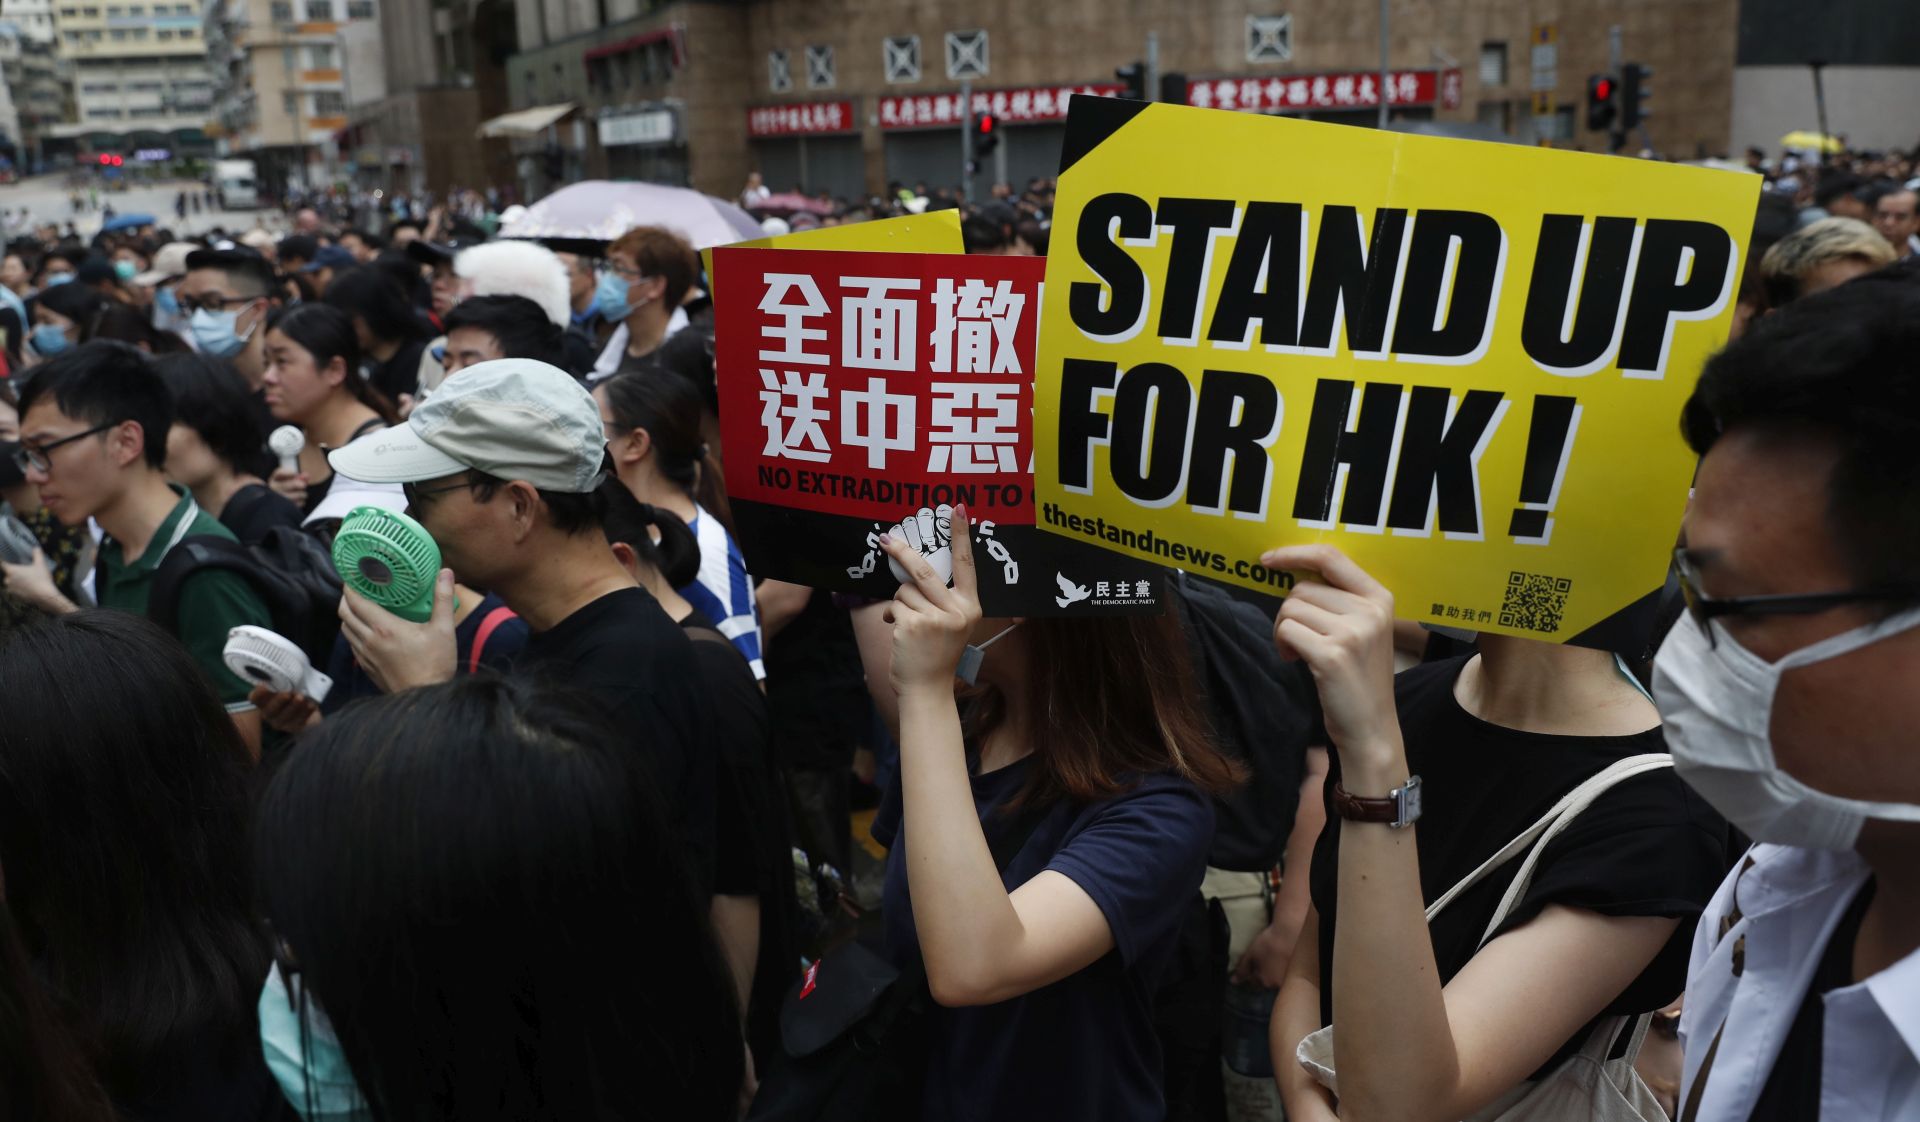 epa07777183 Protesters hold up placards as they take part in a march themed 'Recover Hung Hom' in To Kwa Wan, Hong Kong, China, 17 August 2019. Hung Hom and To Kwa Wan are popular areas for low-cost travel tours from mainland China. The city braced itself for another weekend of protests demanding the full withdrawal of a now-suspended extradition bill as well as the appointment of a judge-led independent inquiry into police use of force on protesters since June.  EPA/ROMAN PILIPEY